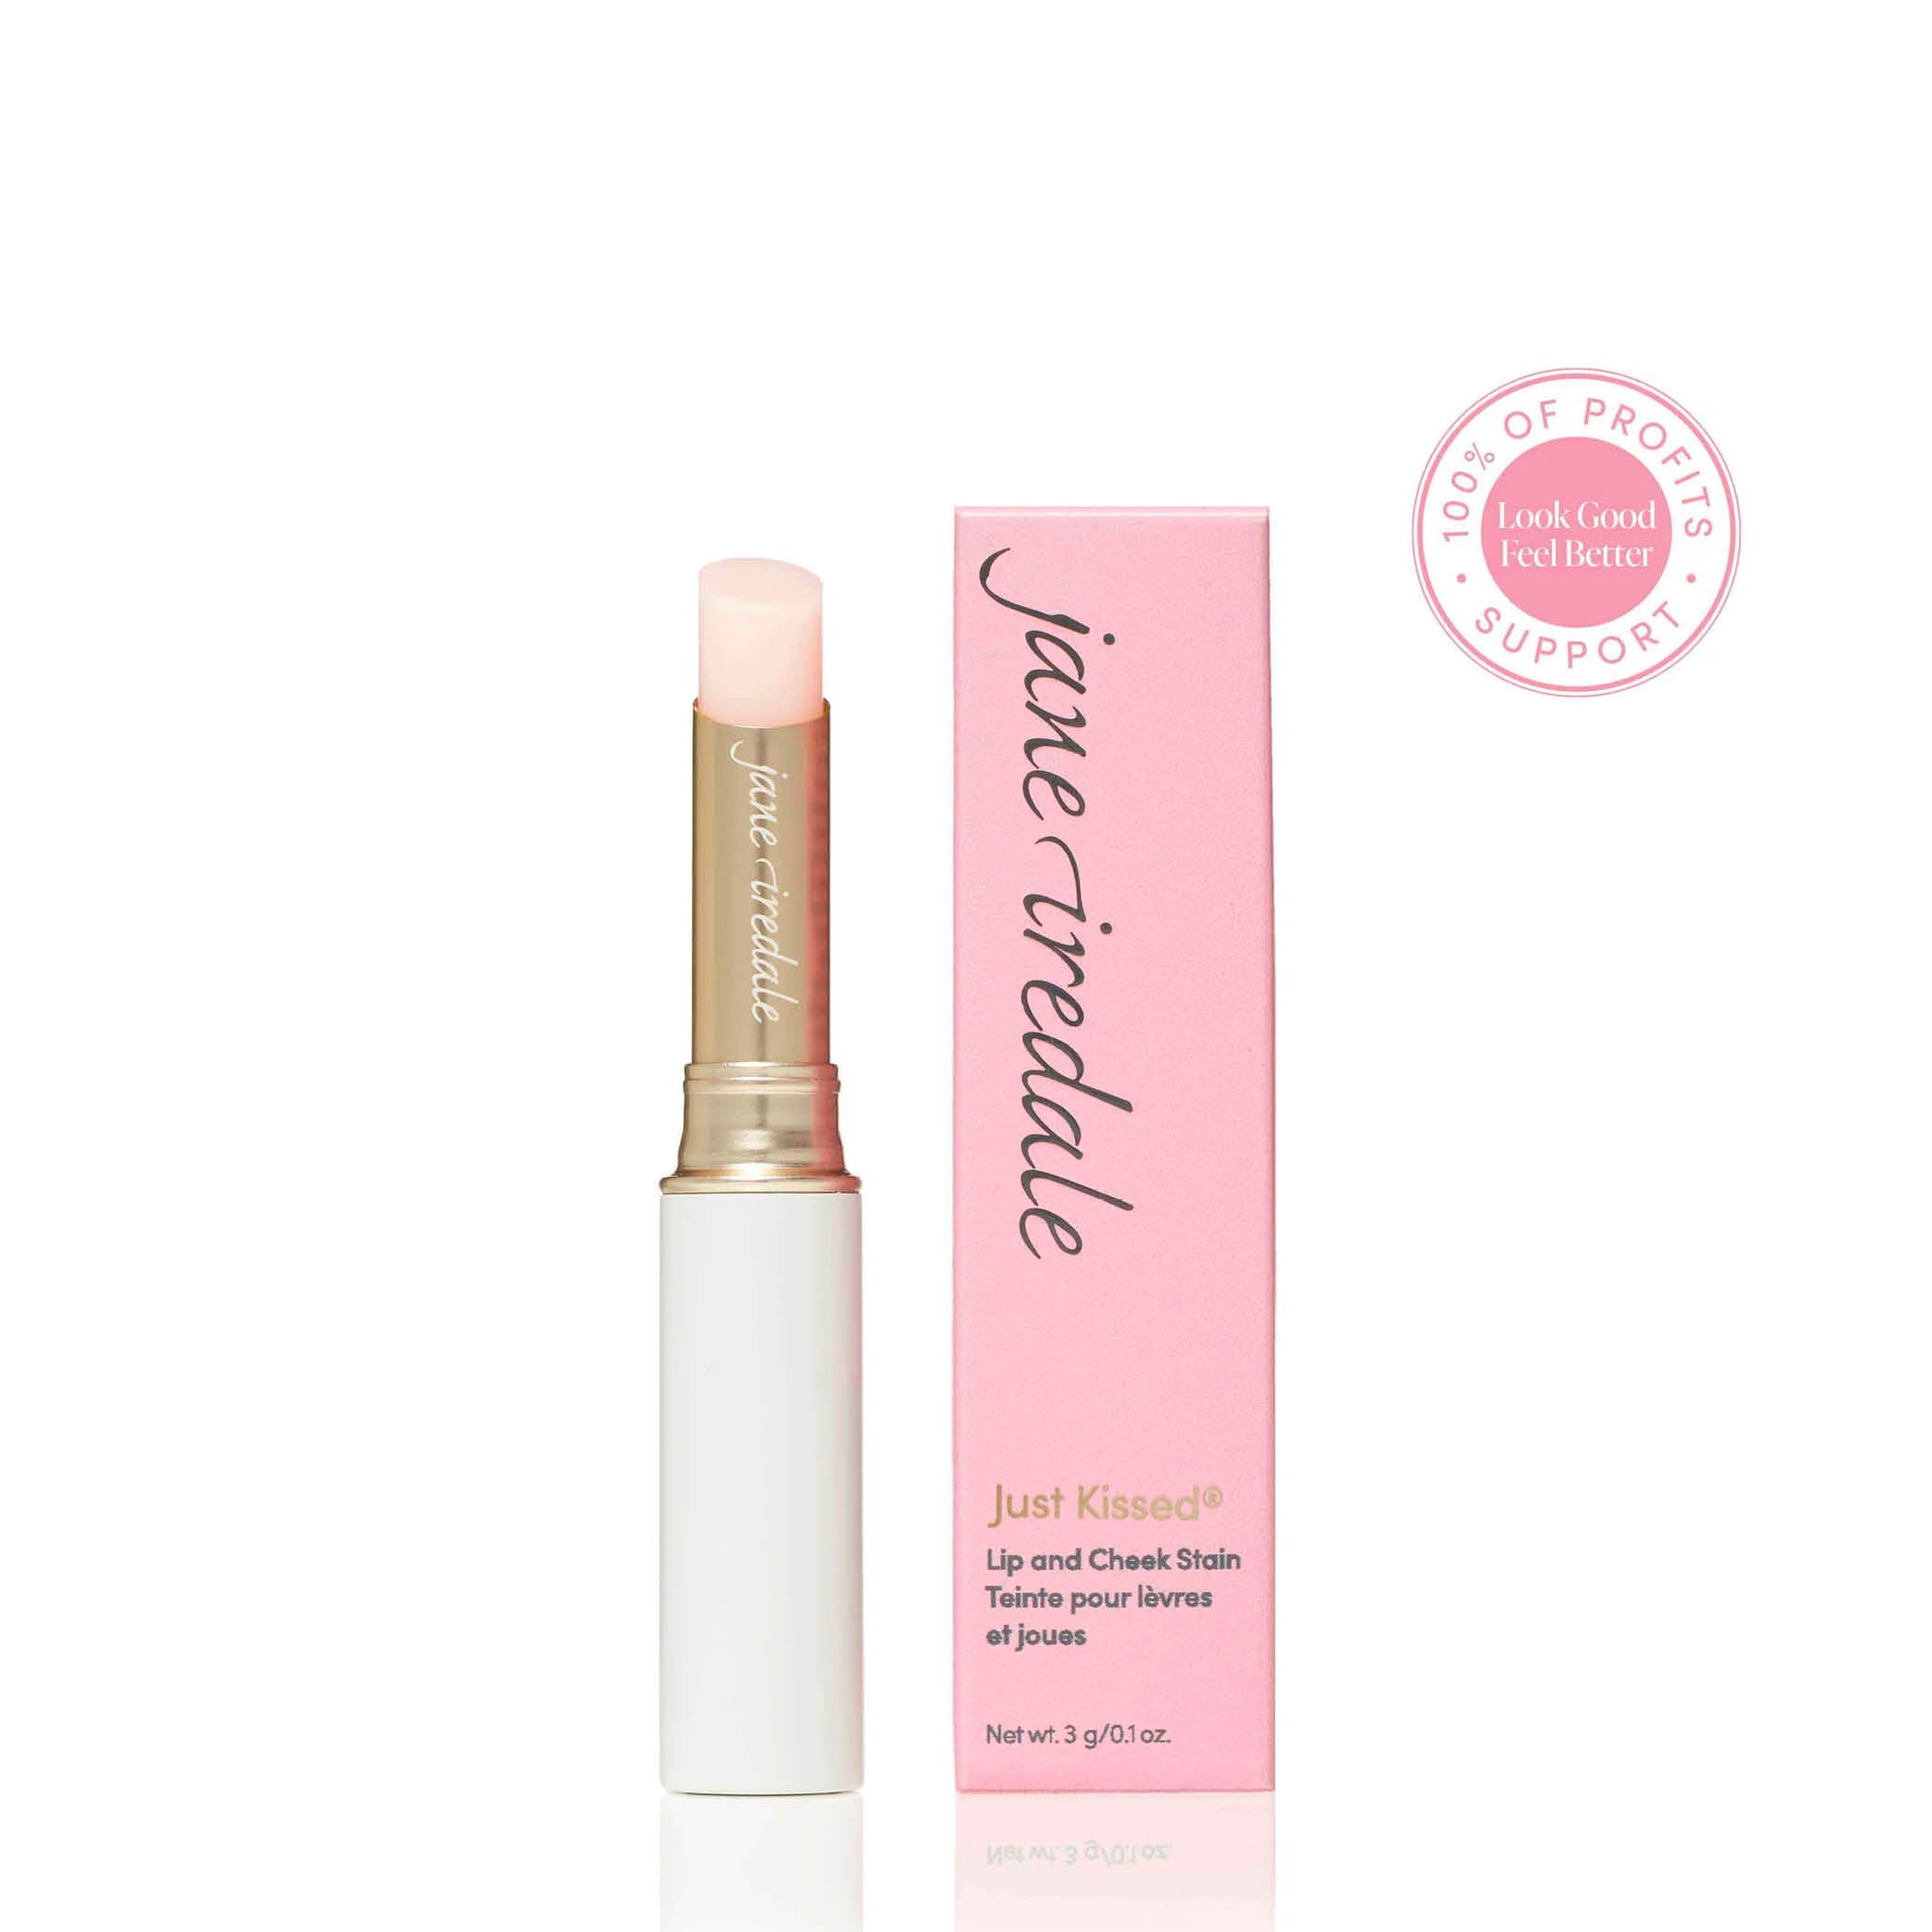 Limited Edition Forever You Just Kissed® Lip and Cheek Stain